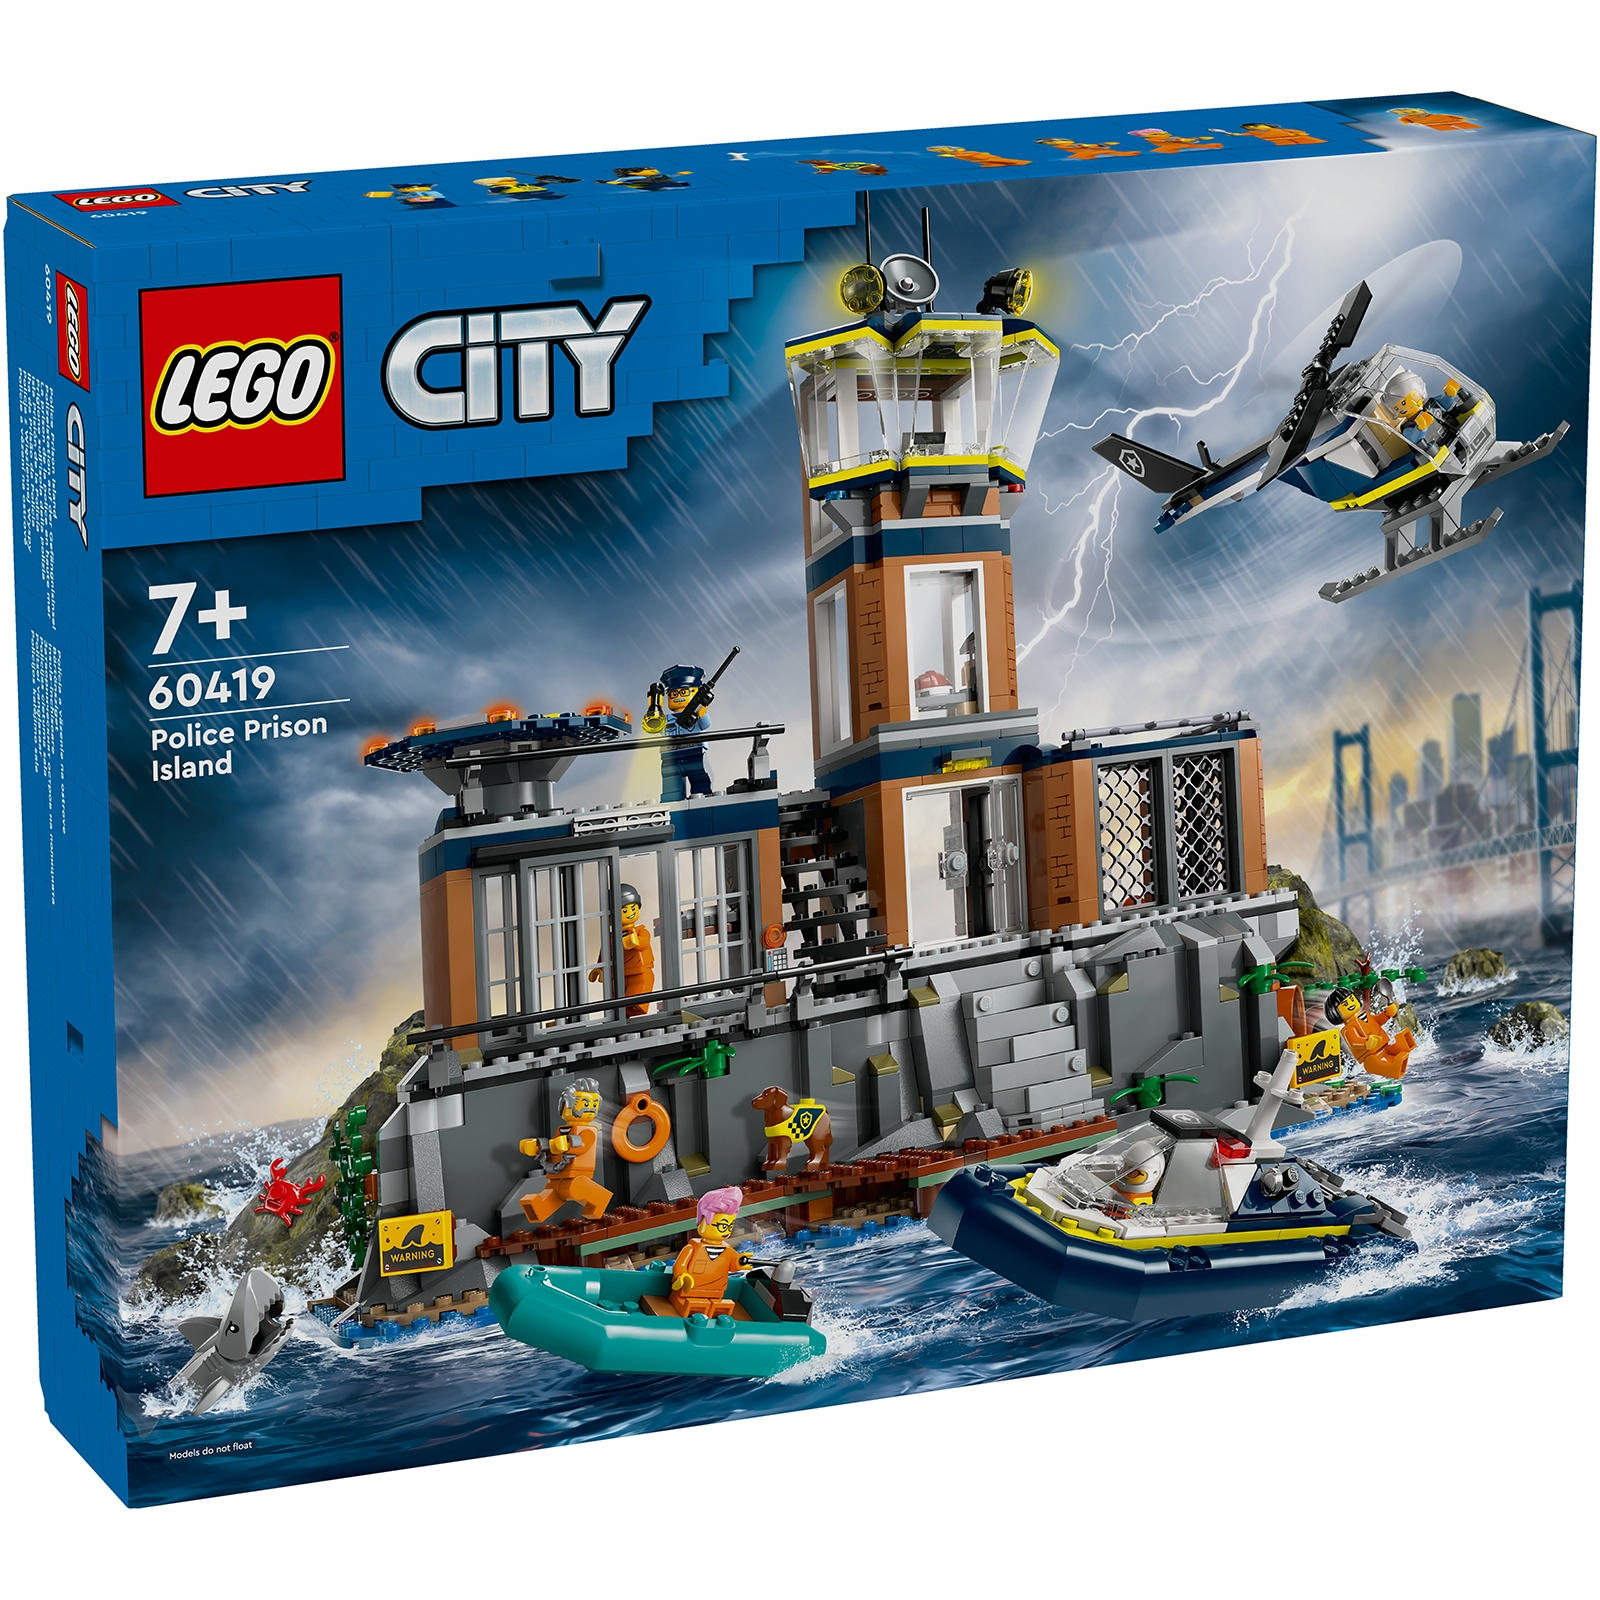 Image of 60419 LEGO® CITY Police station on the prison island